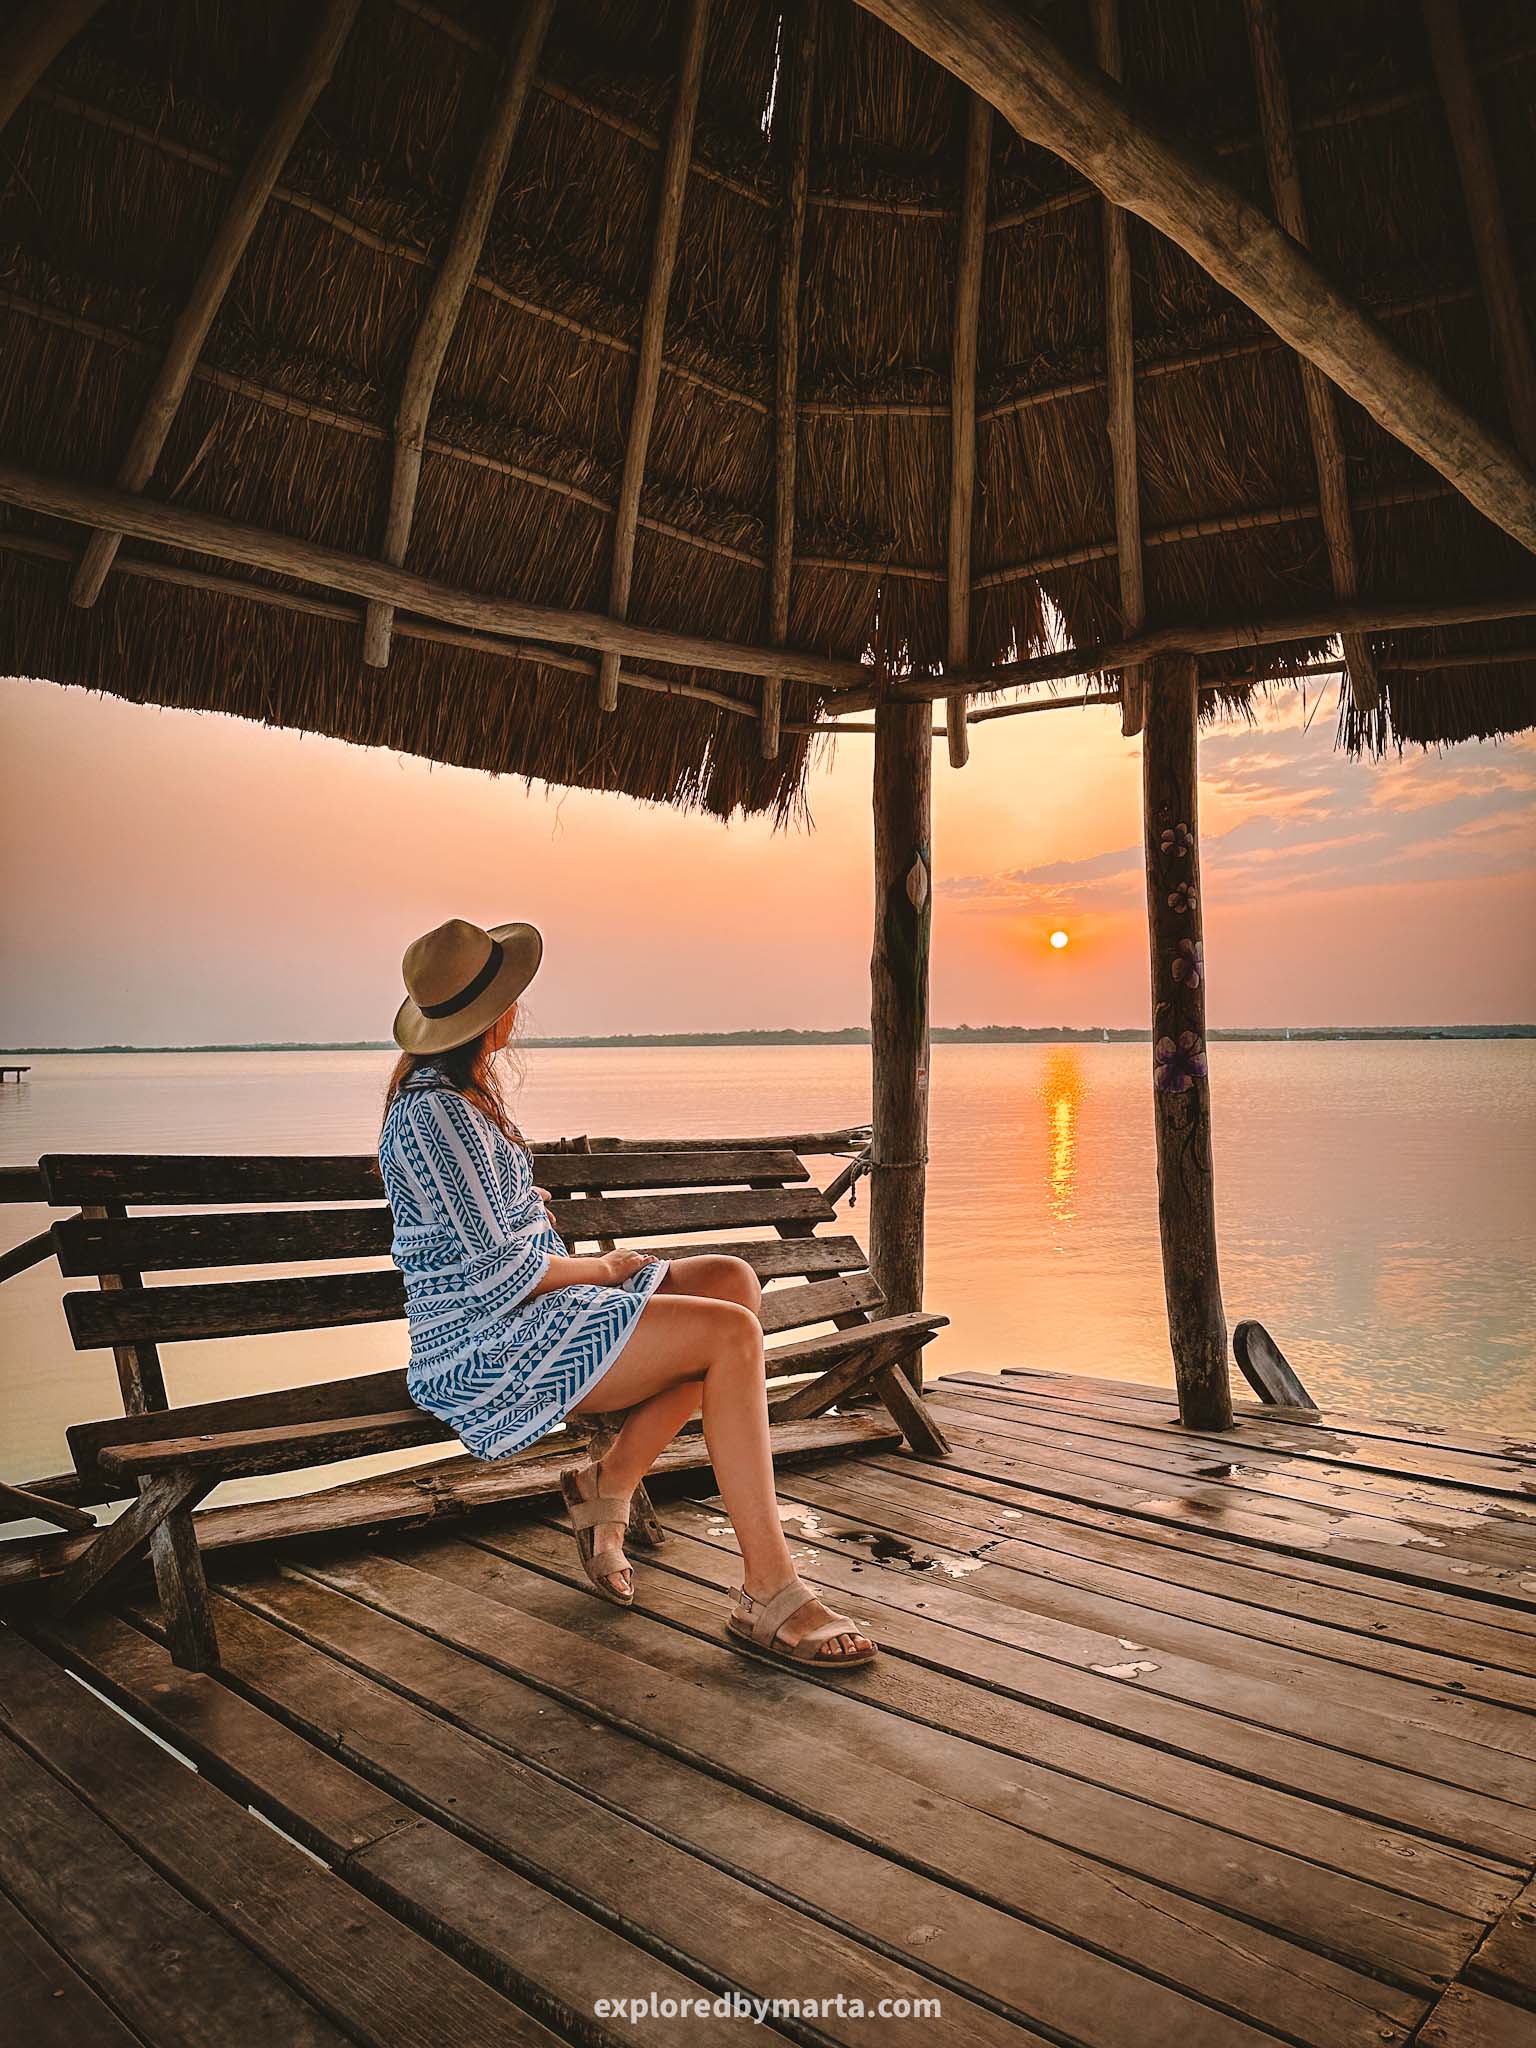 Bacalar, Mexico-sunrise over the Lagoon of Seven Colors seen from a charming wooden deck